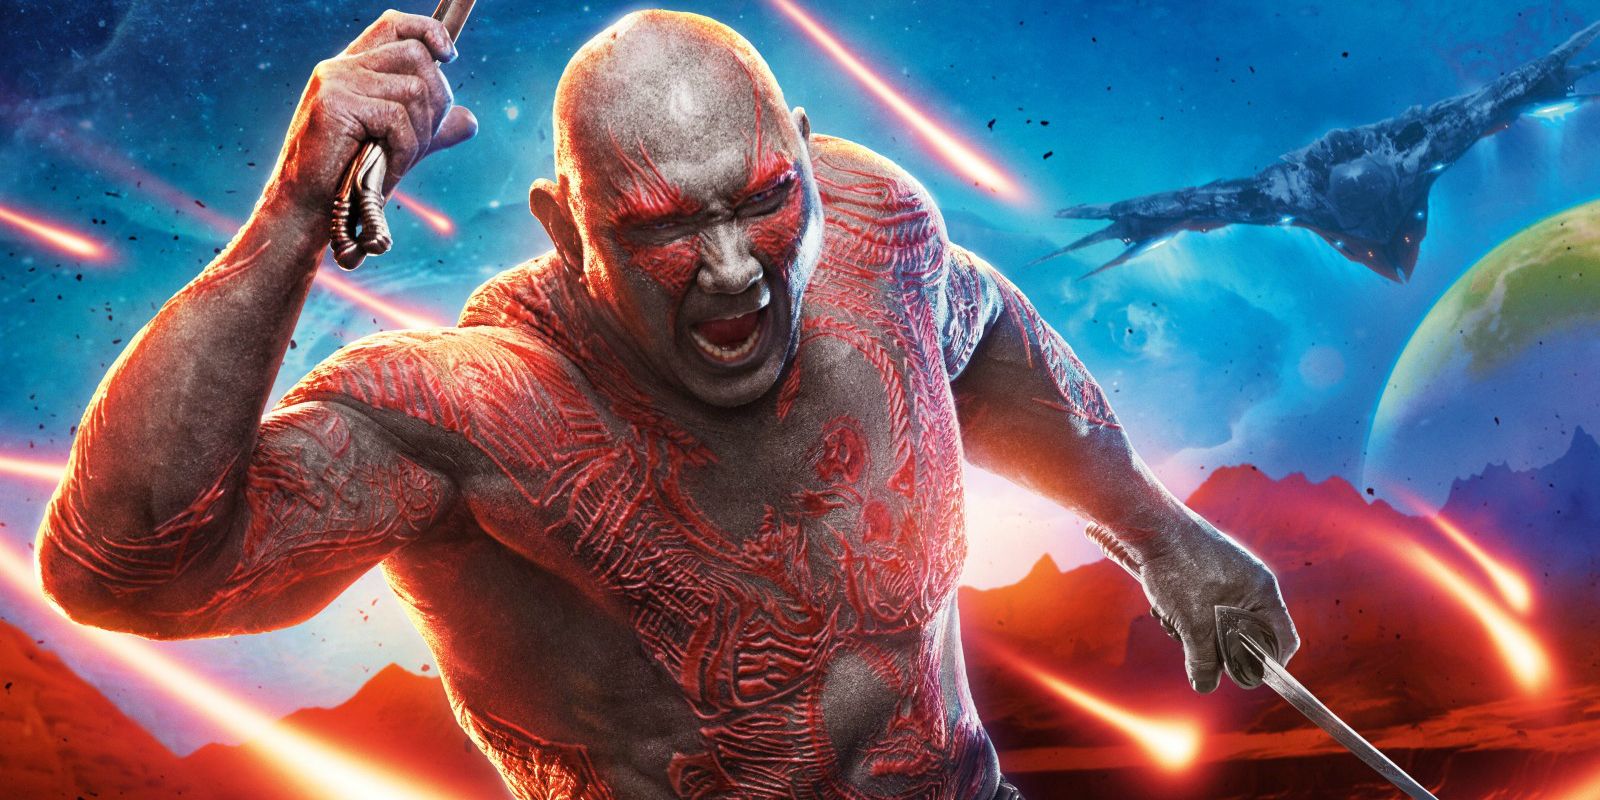 Drax yells with his weapons in a poster for the MCU